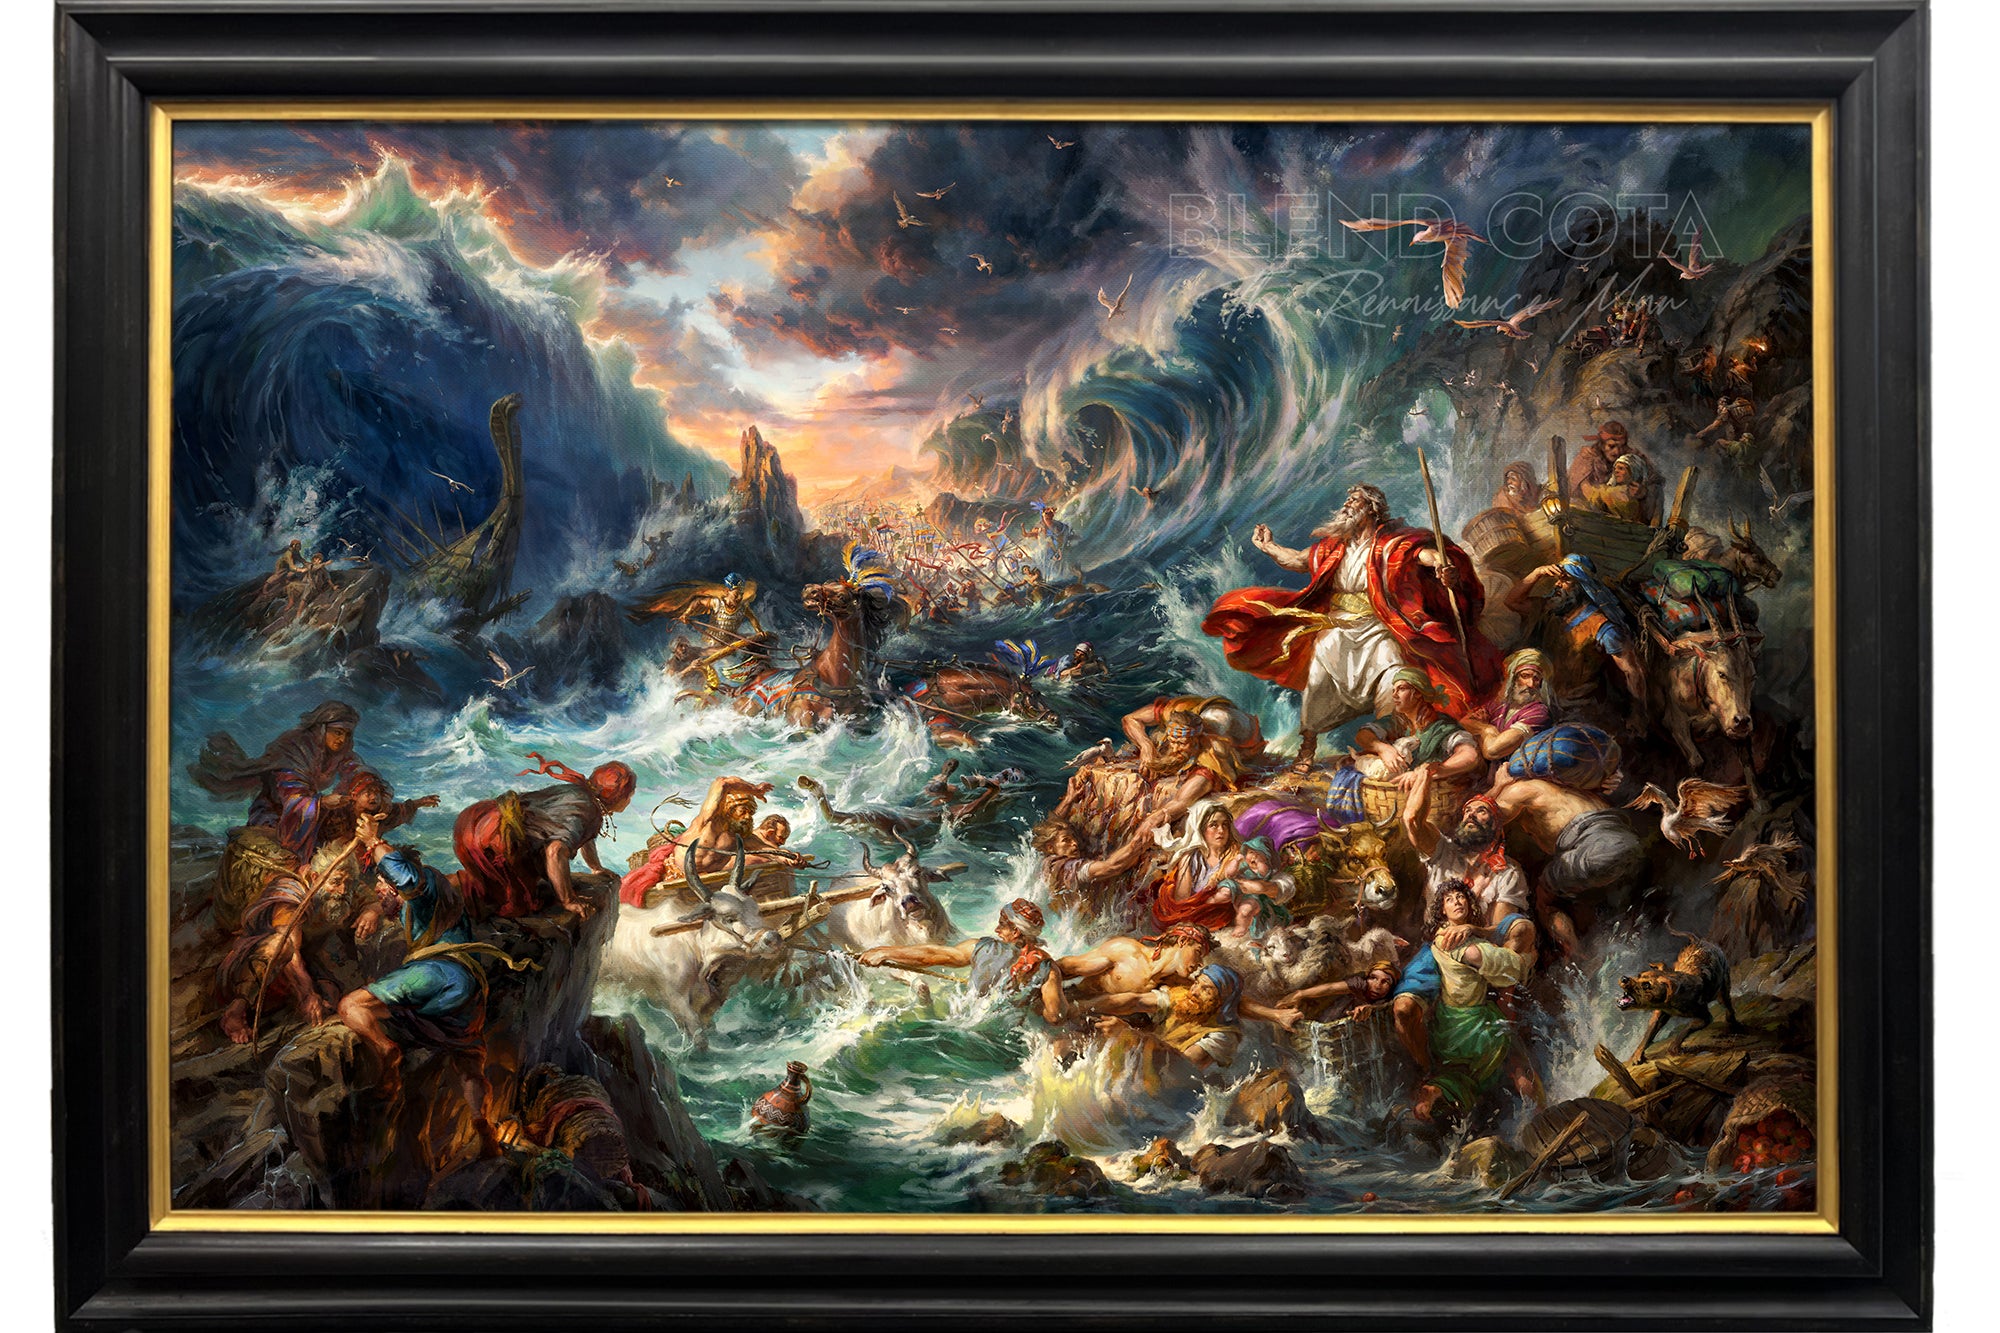 Nothing is Impossible | Moses Parting the Red Sea - Blend Cota Original Oil Painting Framed on Canvas - Blend Cota Studios - Black and Gold Frame